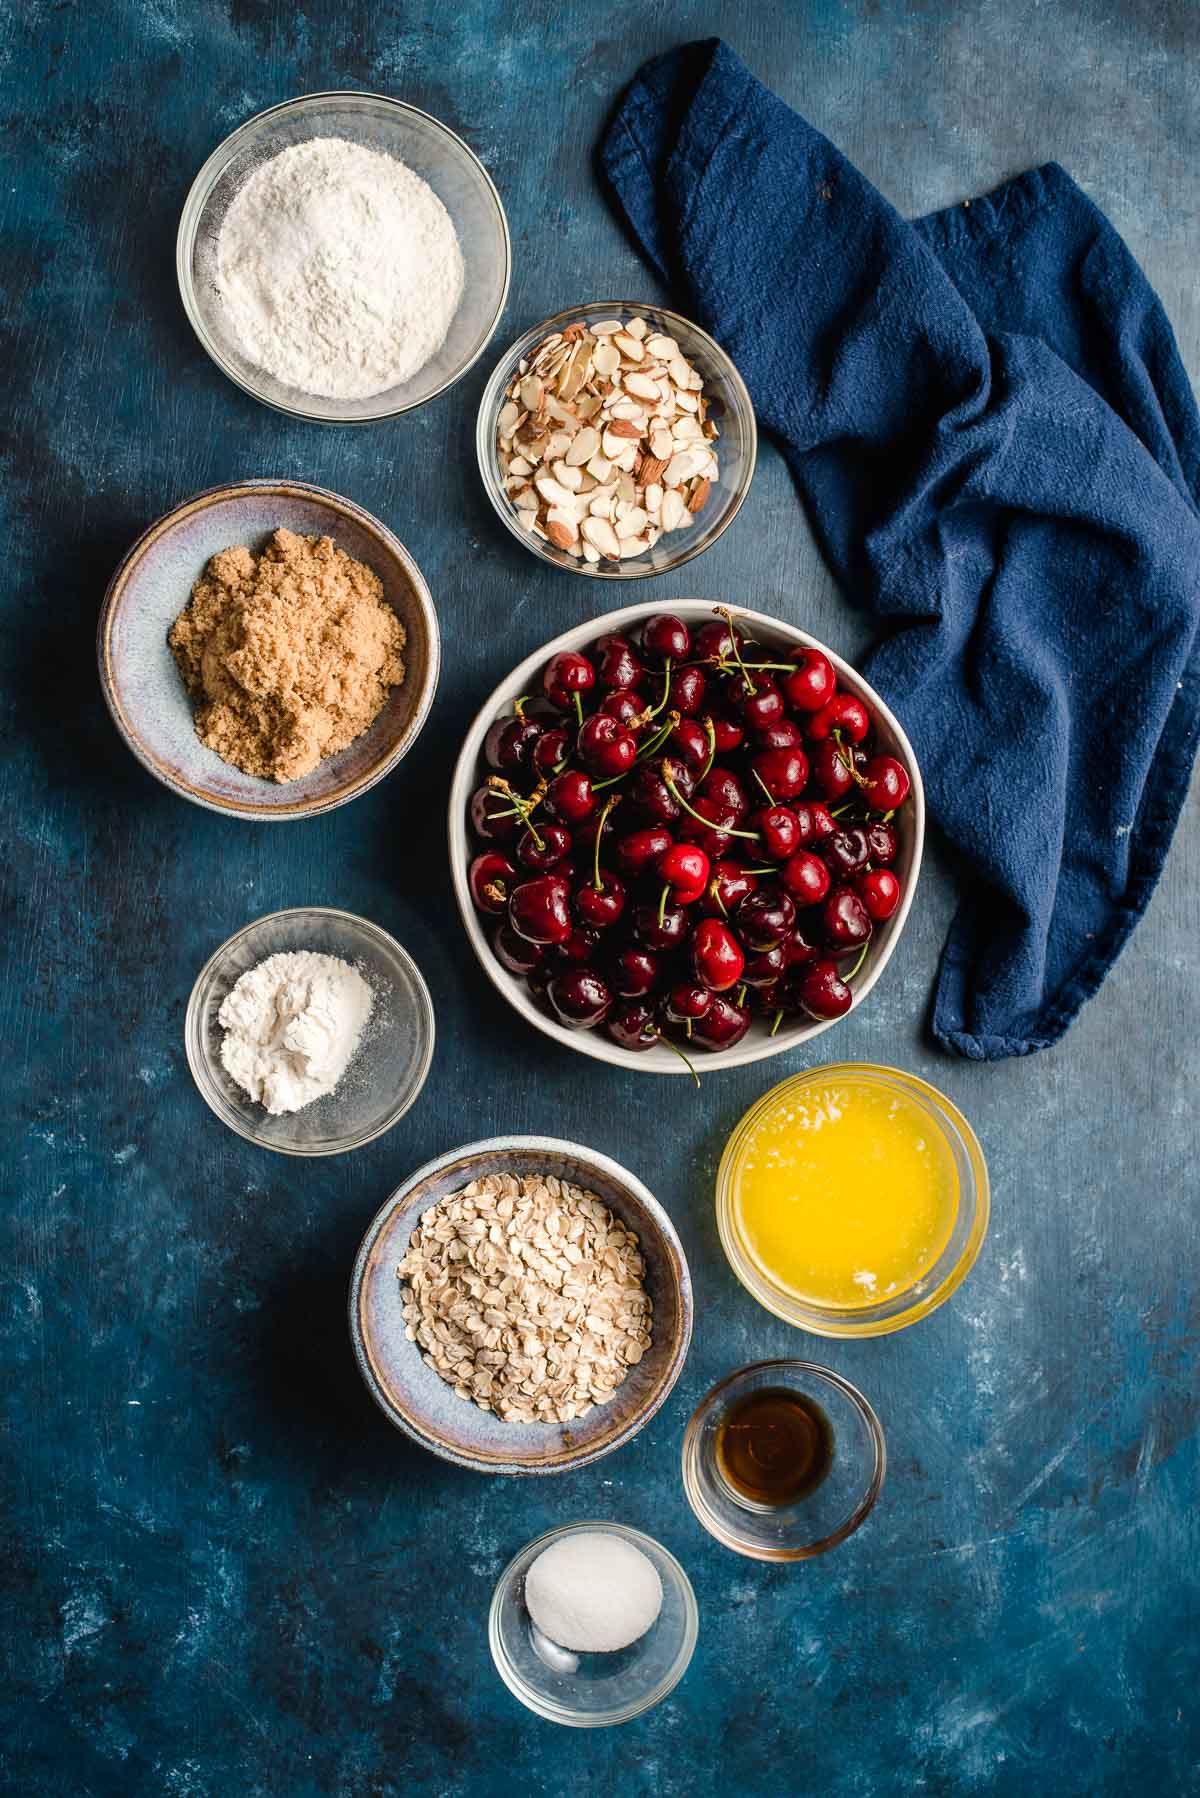 Ingredients for fresh cherry crumble displayed in prep bowls on a blue background.